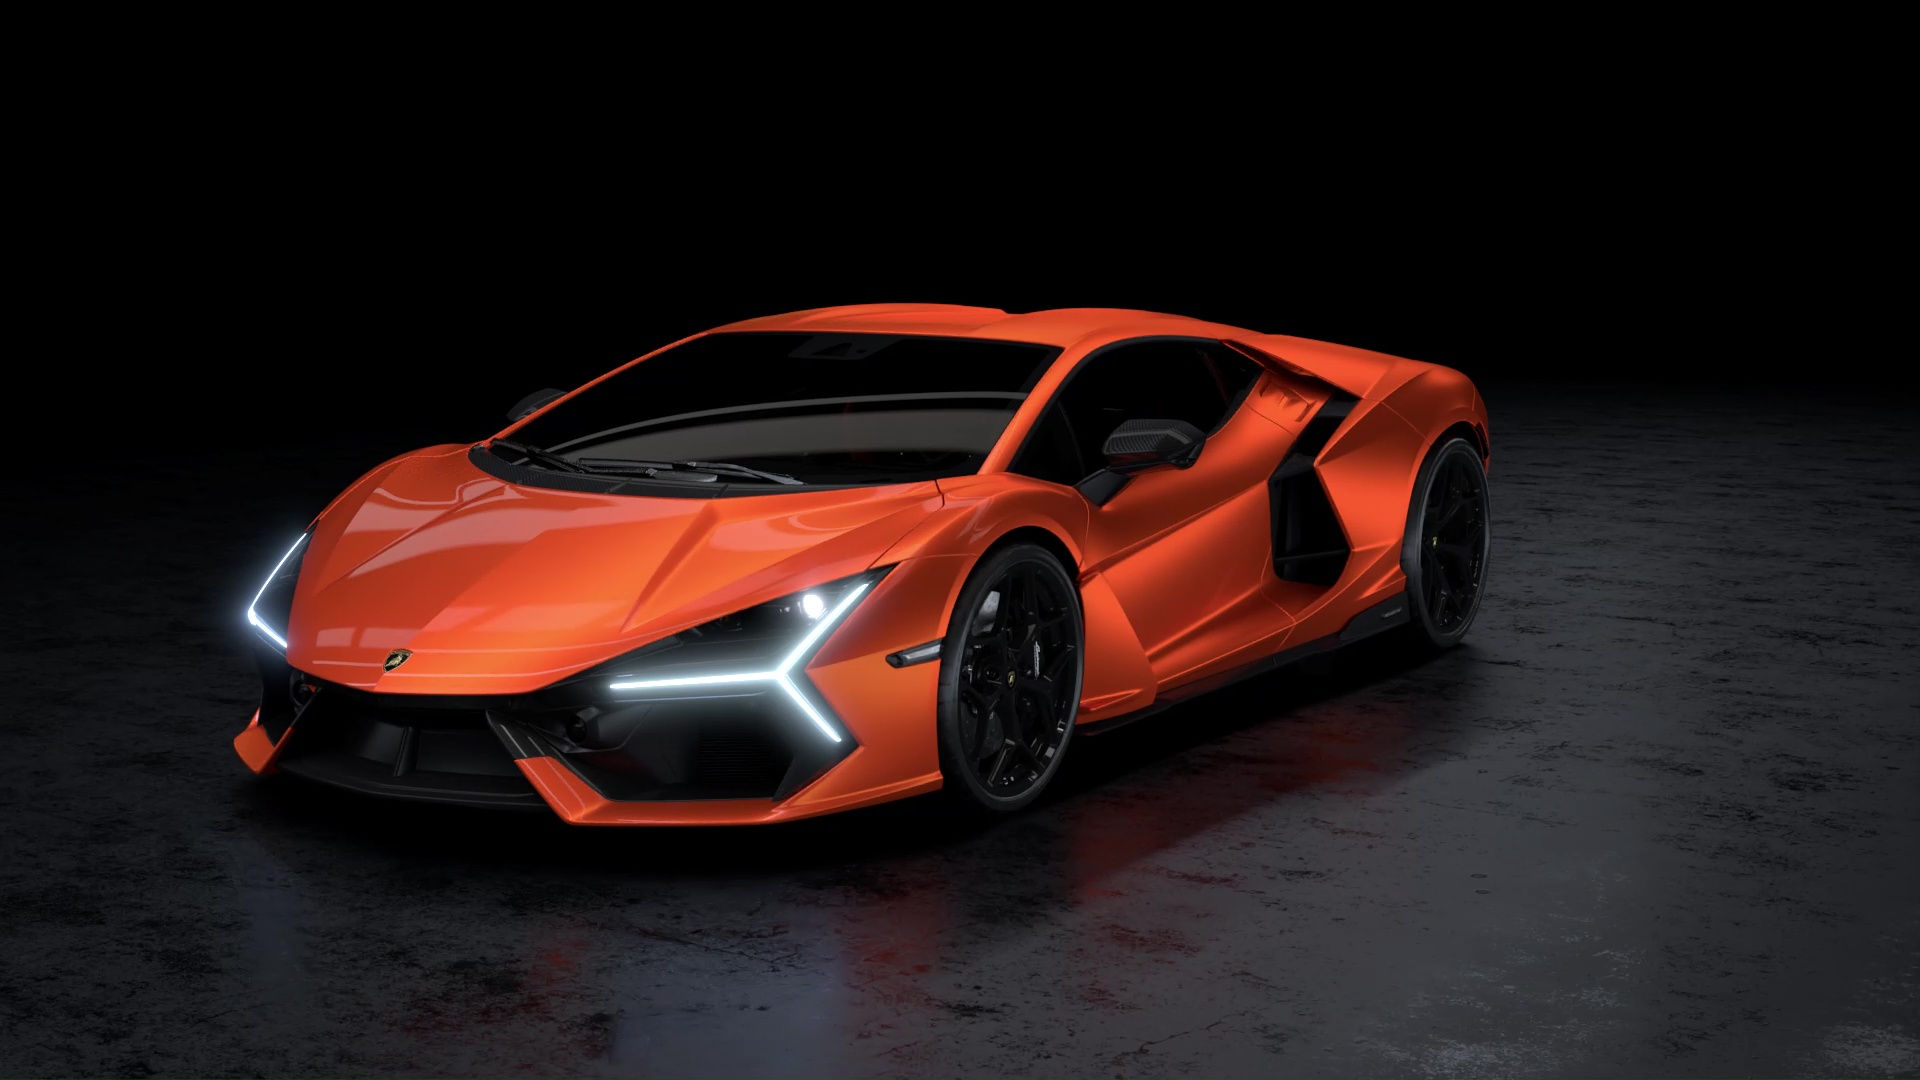 Lamborghini Revuelto Receives Tailored Sound System Worthy of Its $600,000 Price Tag